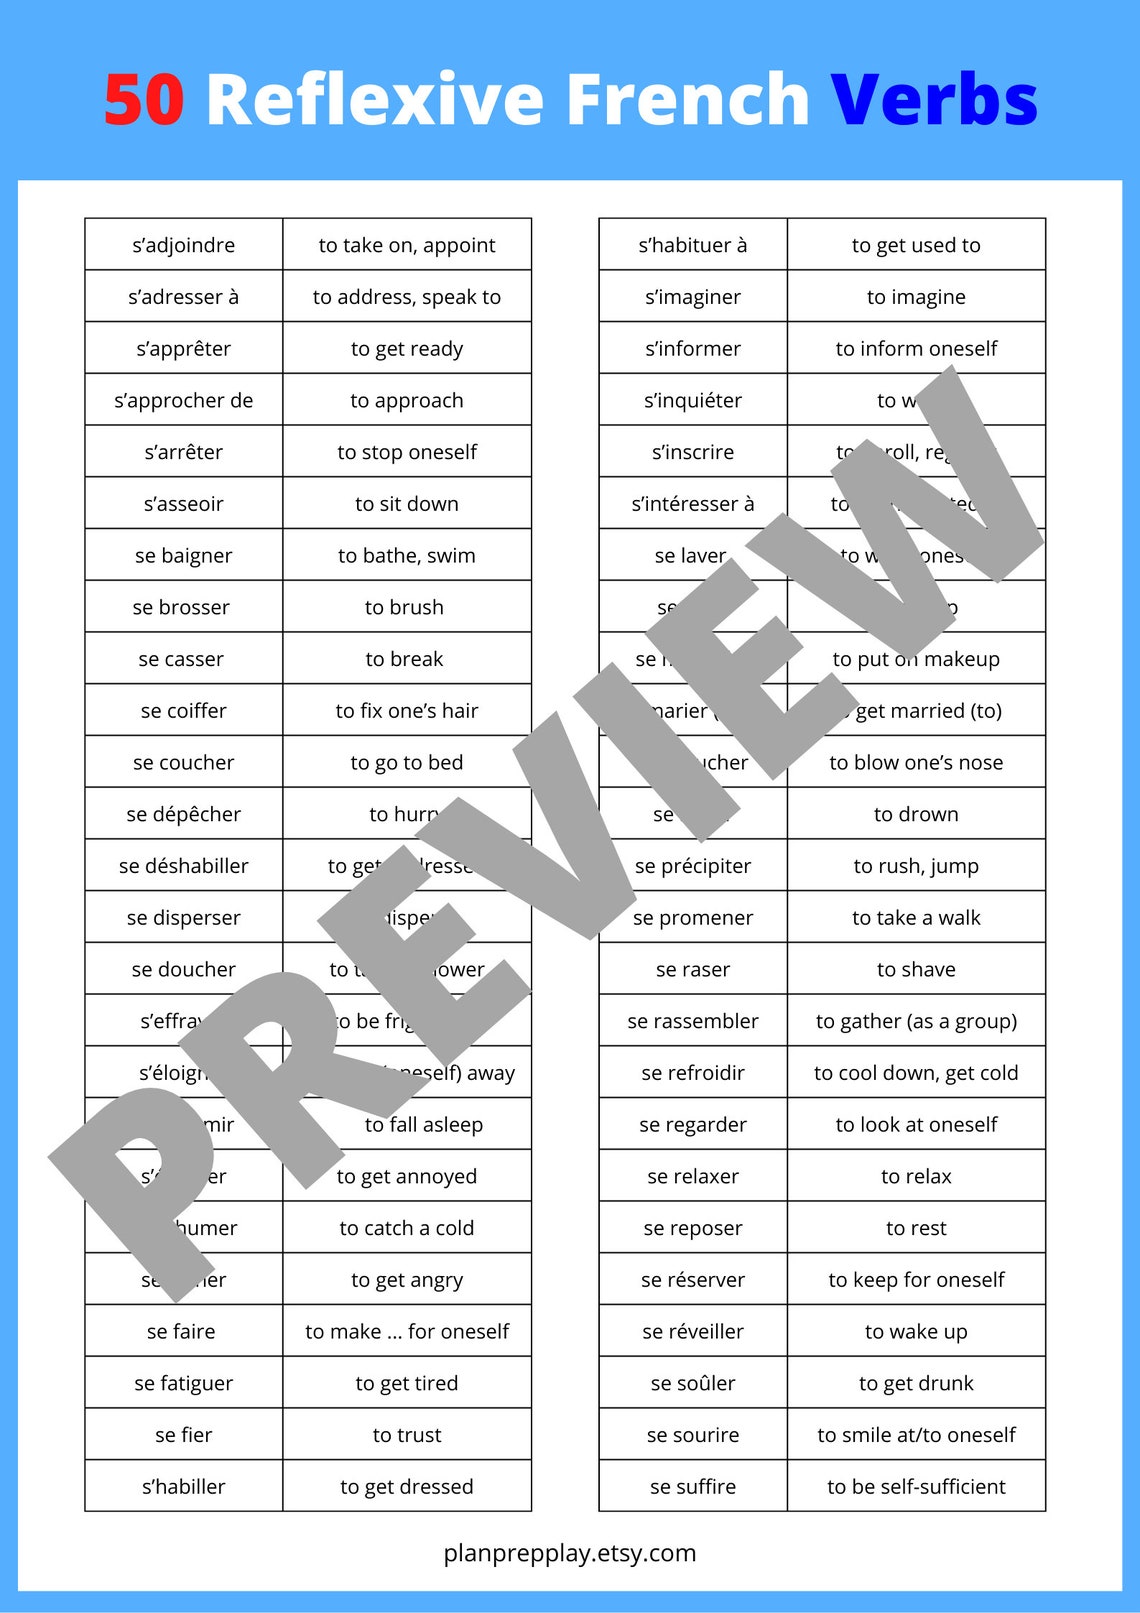 50-most-common-french-reflexive-verbs-instant-download-pdf-etsy